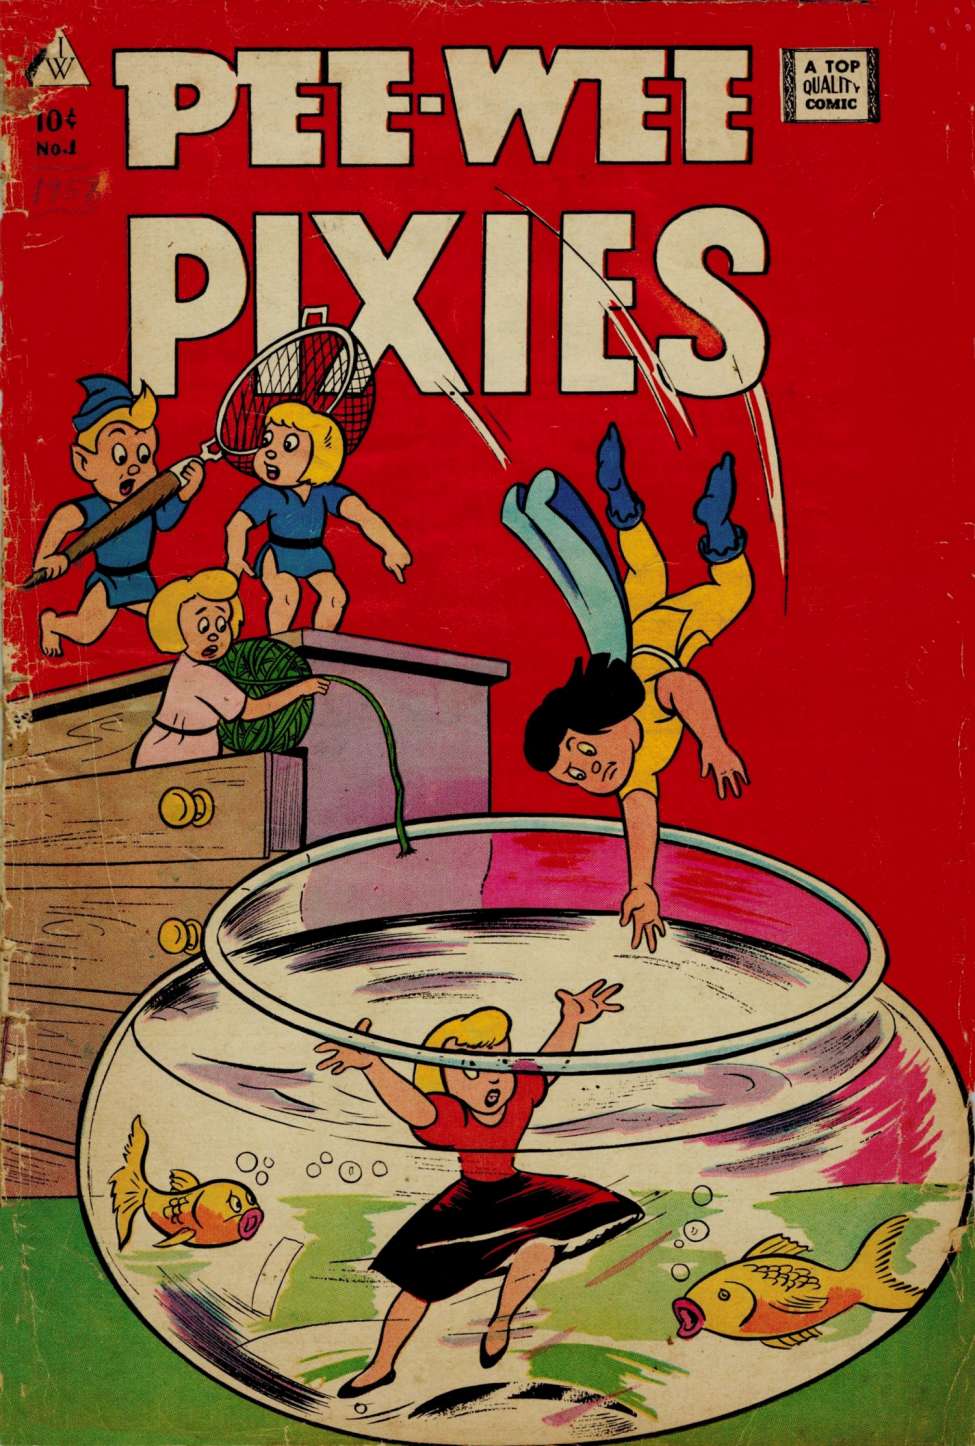 Comic Book Cover For Pee-Wee Pixies 1